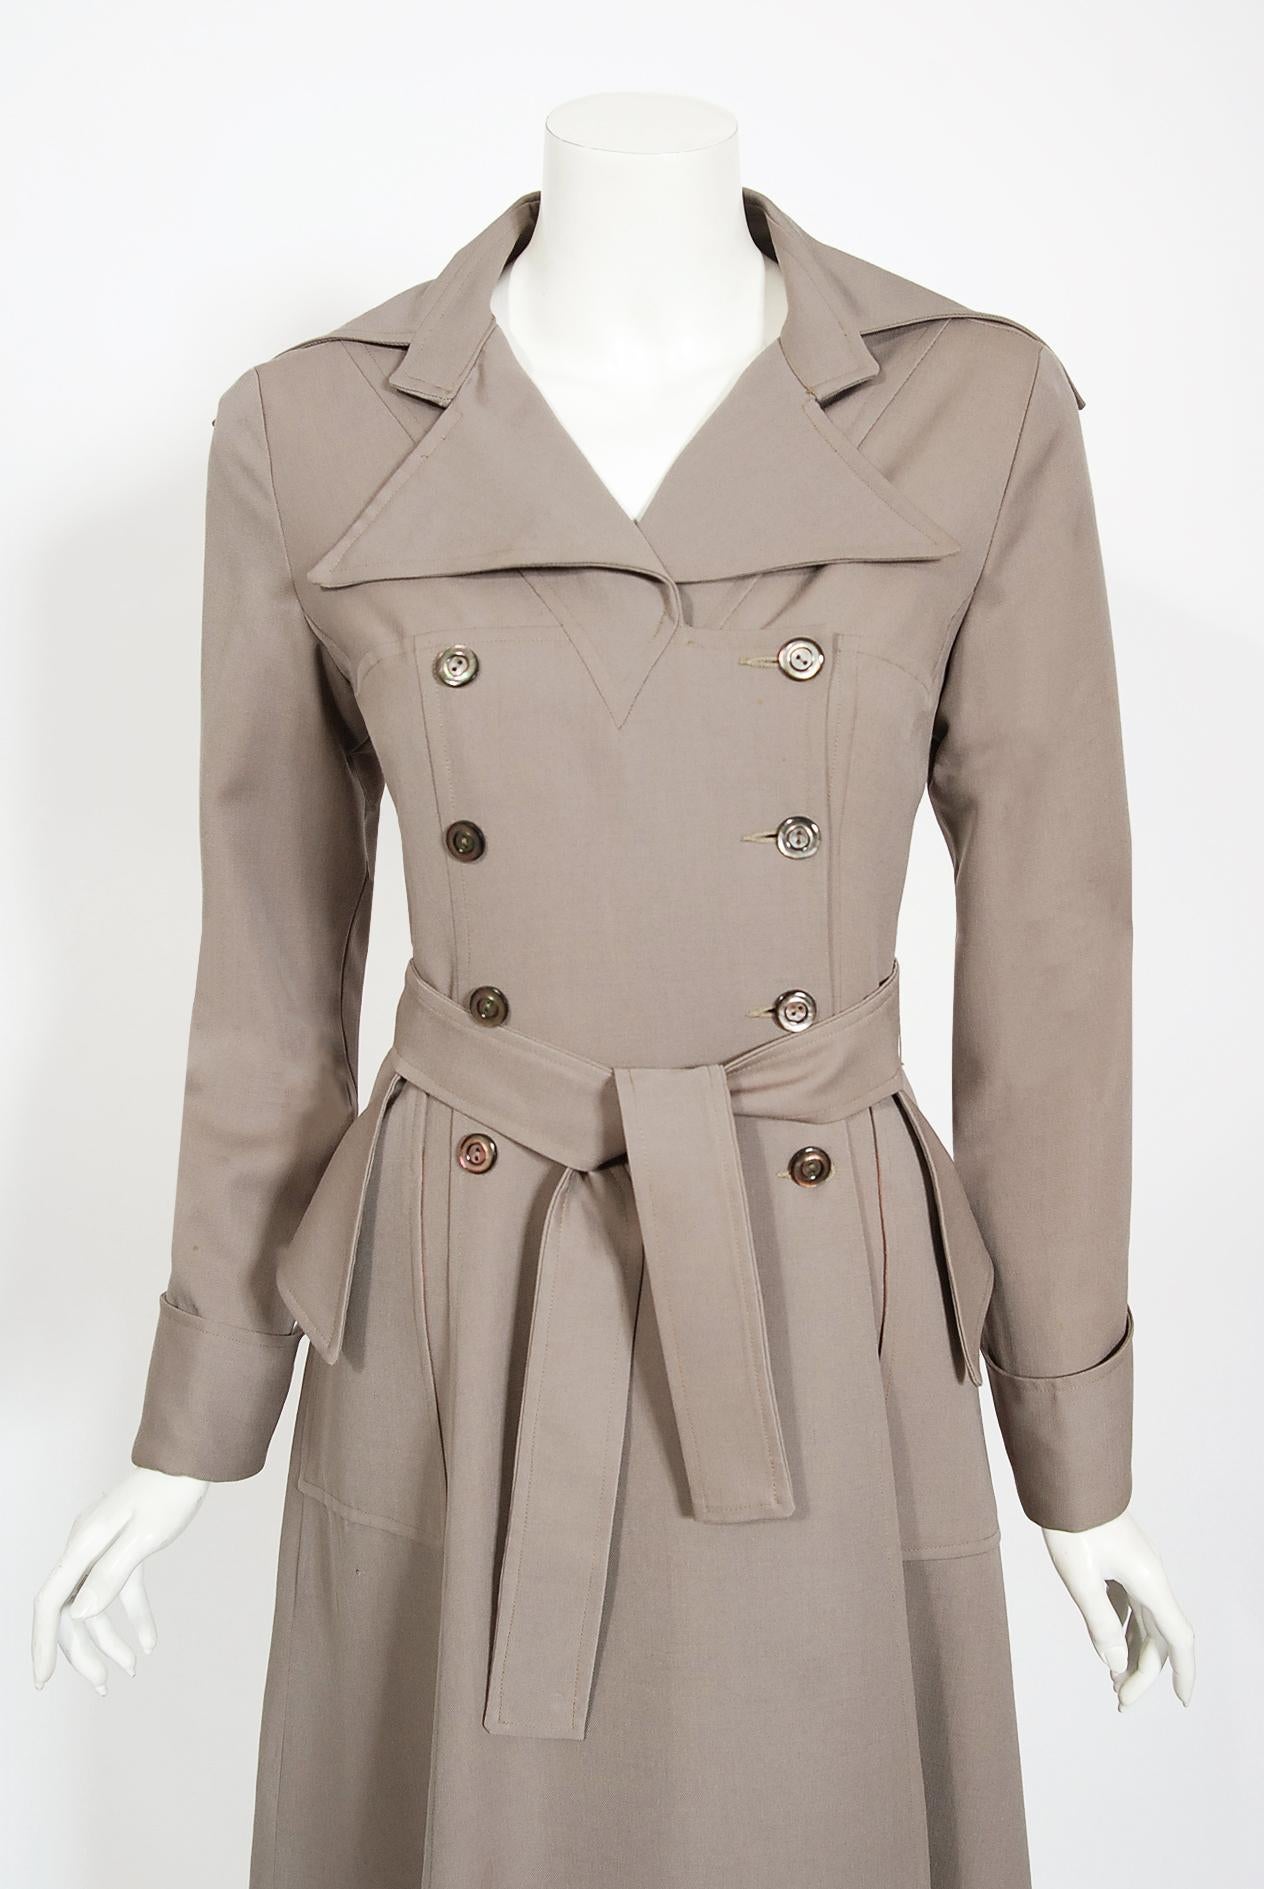 Iconic and totally stunning Ossie Clark dove-gray cotton twill trench coat dating back to his 1970 couture collection. English fashion designer, Raymond 